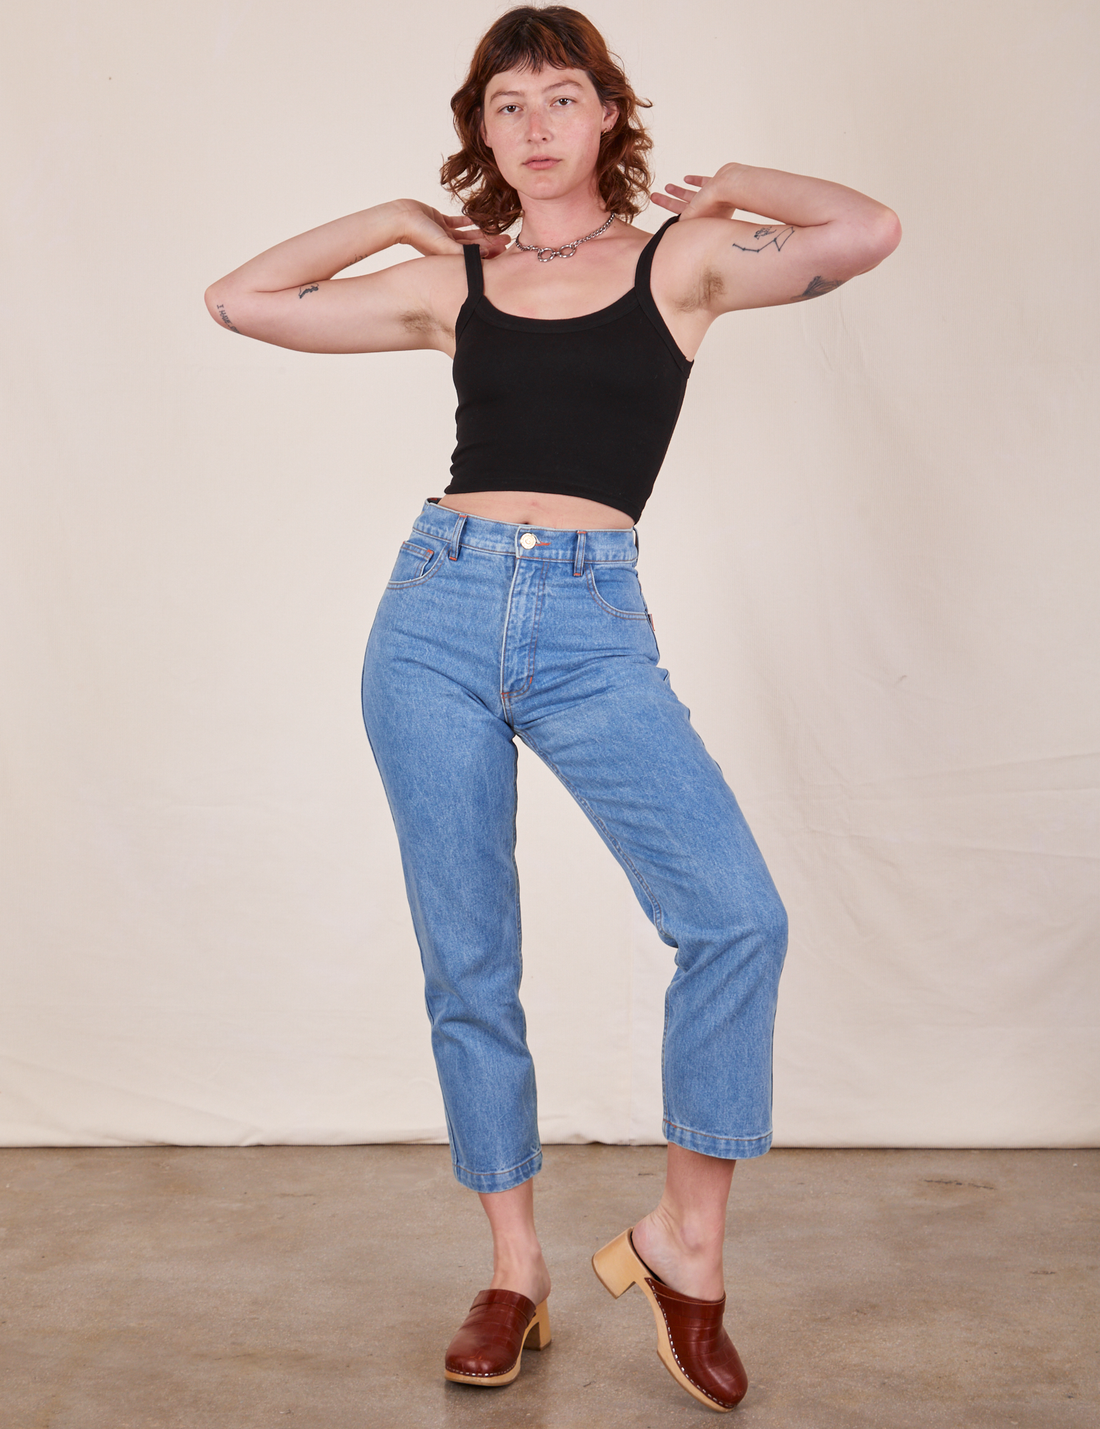 Alex is wearing P Cropped Cami in Basic Black worn with light wash Frontier Jeans